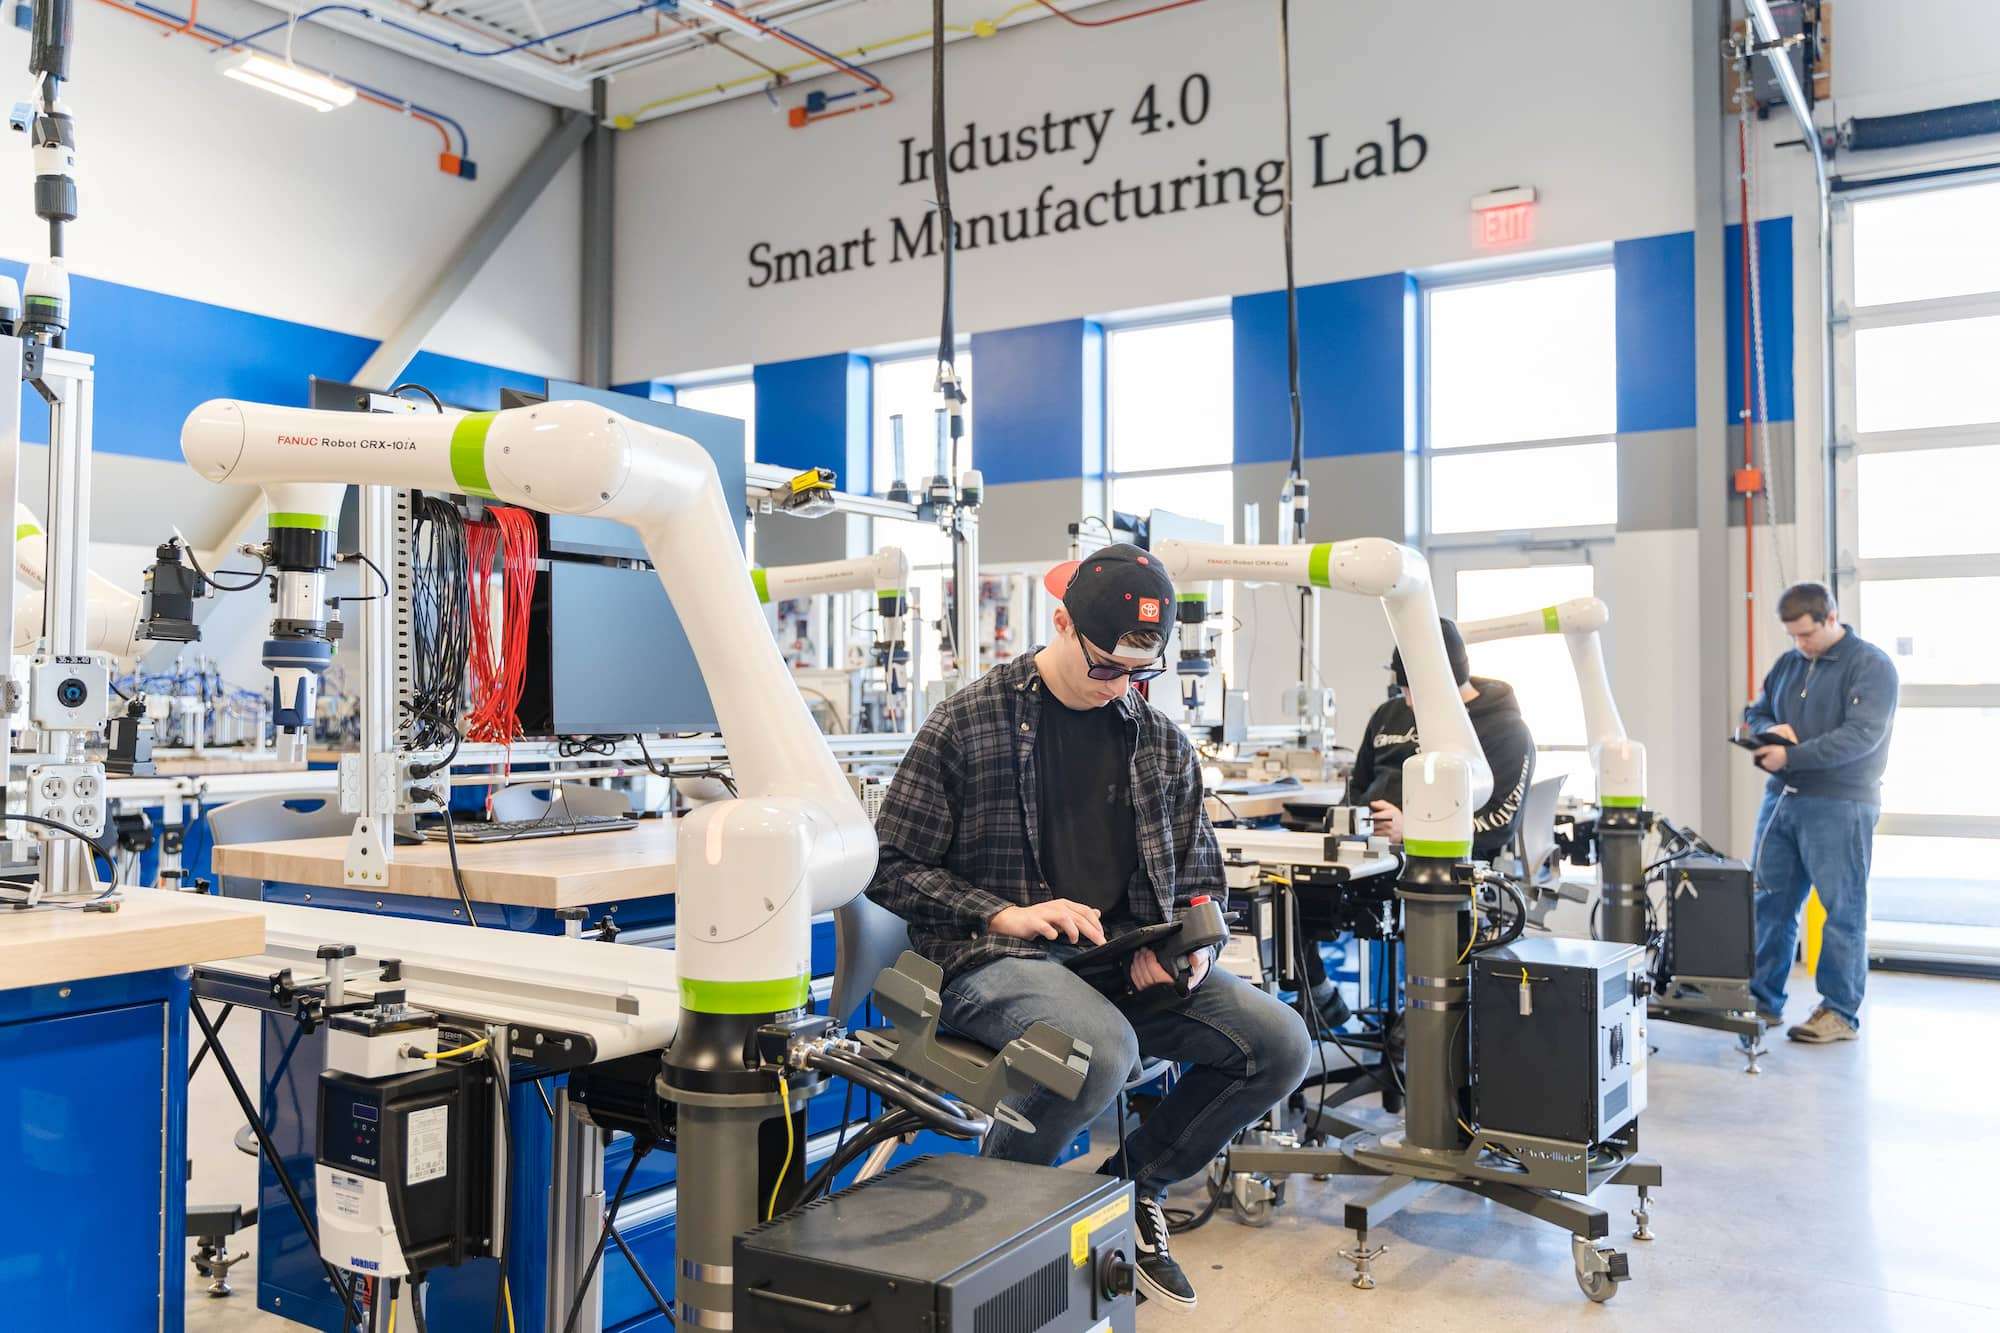 A wide-view shows NTC's Smart Manufacturing Lab, where three students are each configuring their own manufacturing robot.